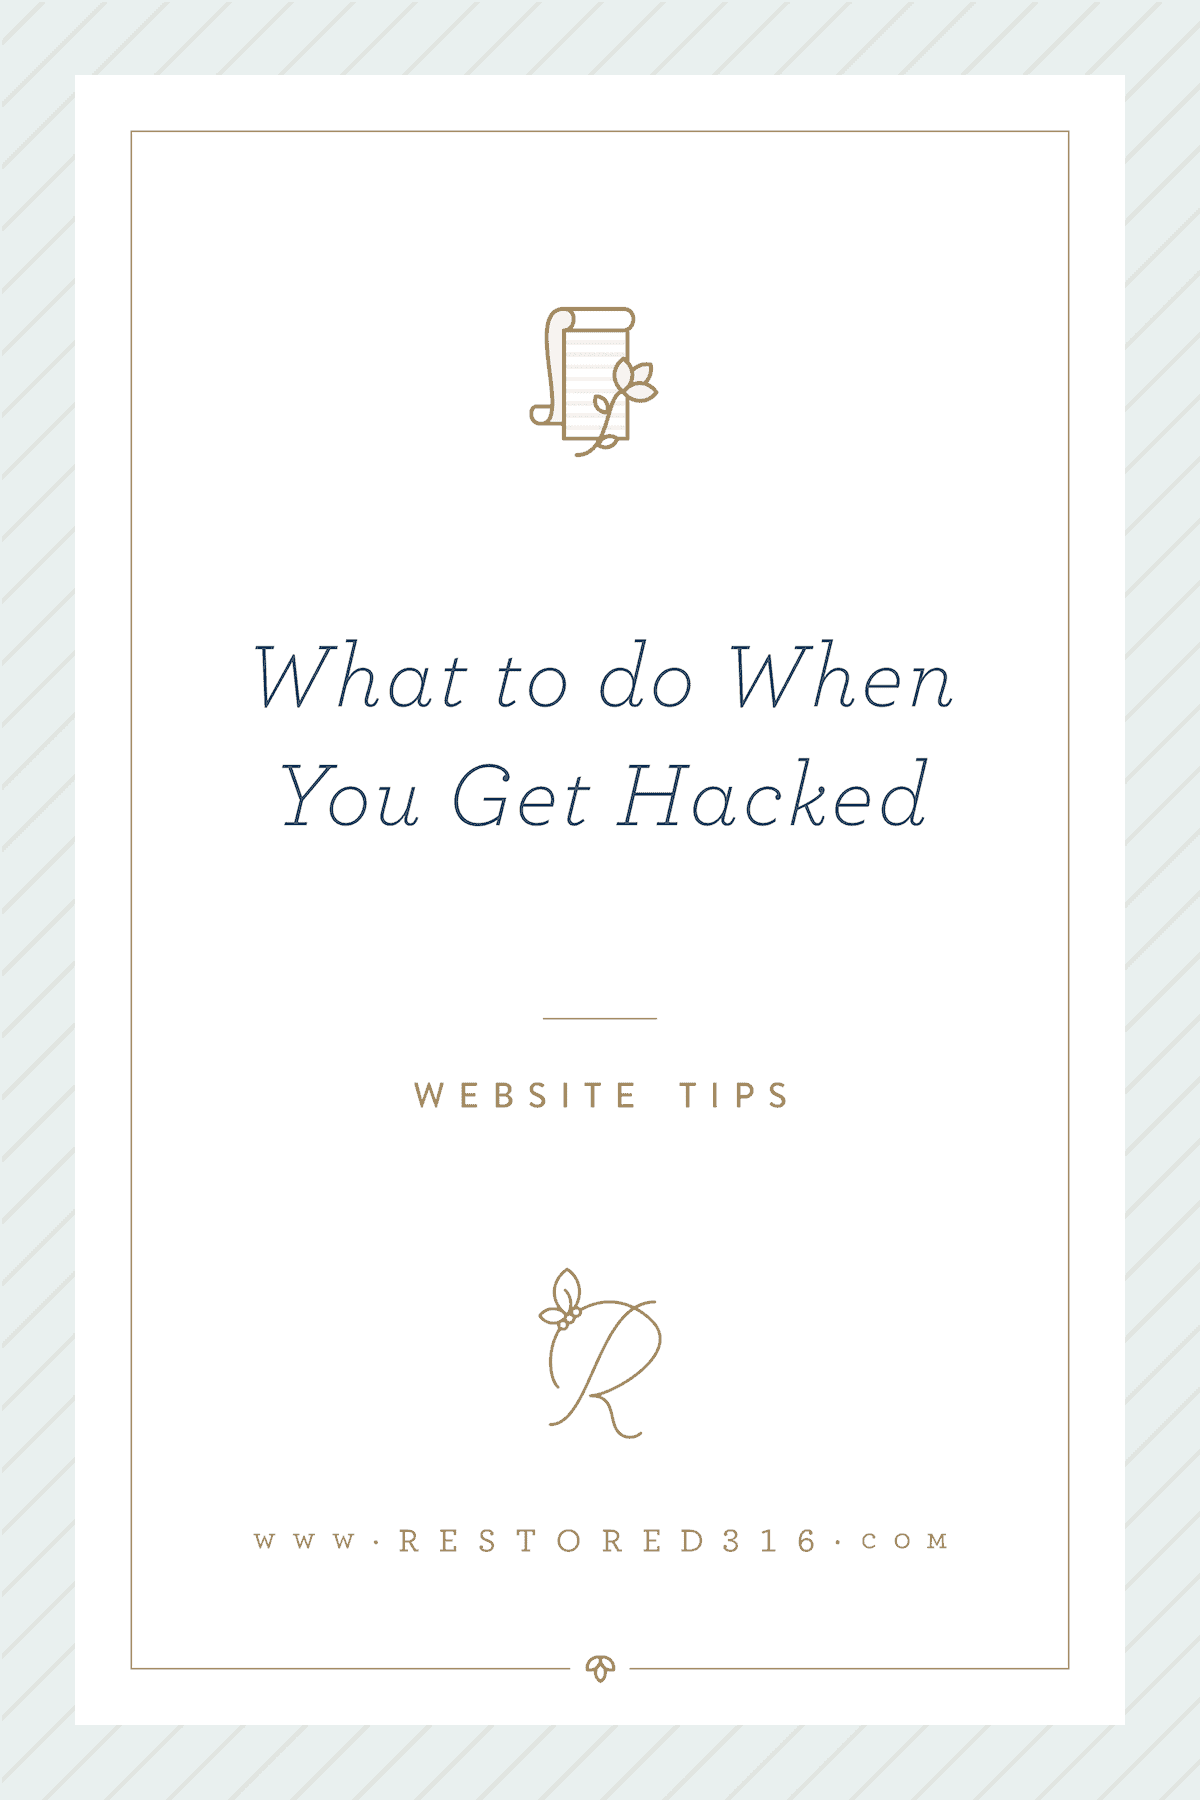 What to Do When you Site Gets Hacked